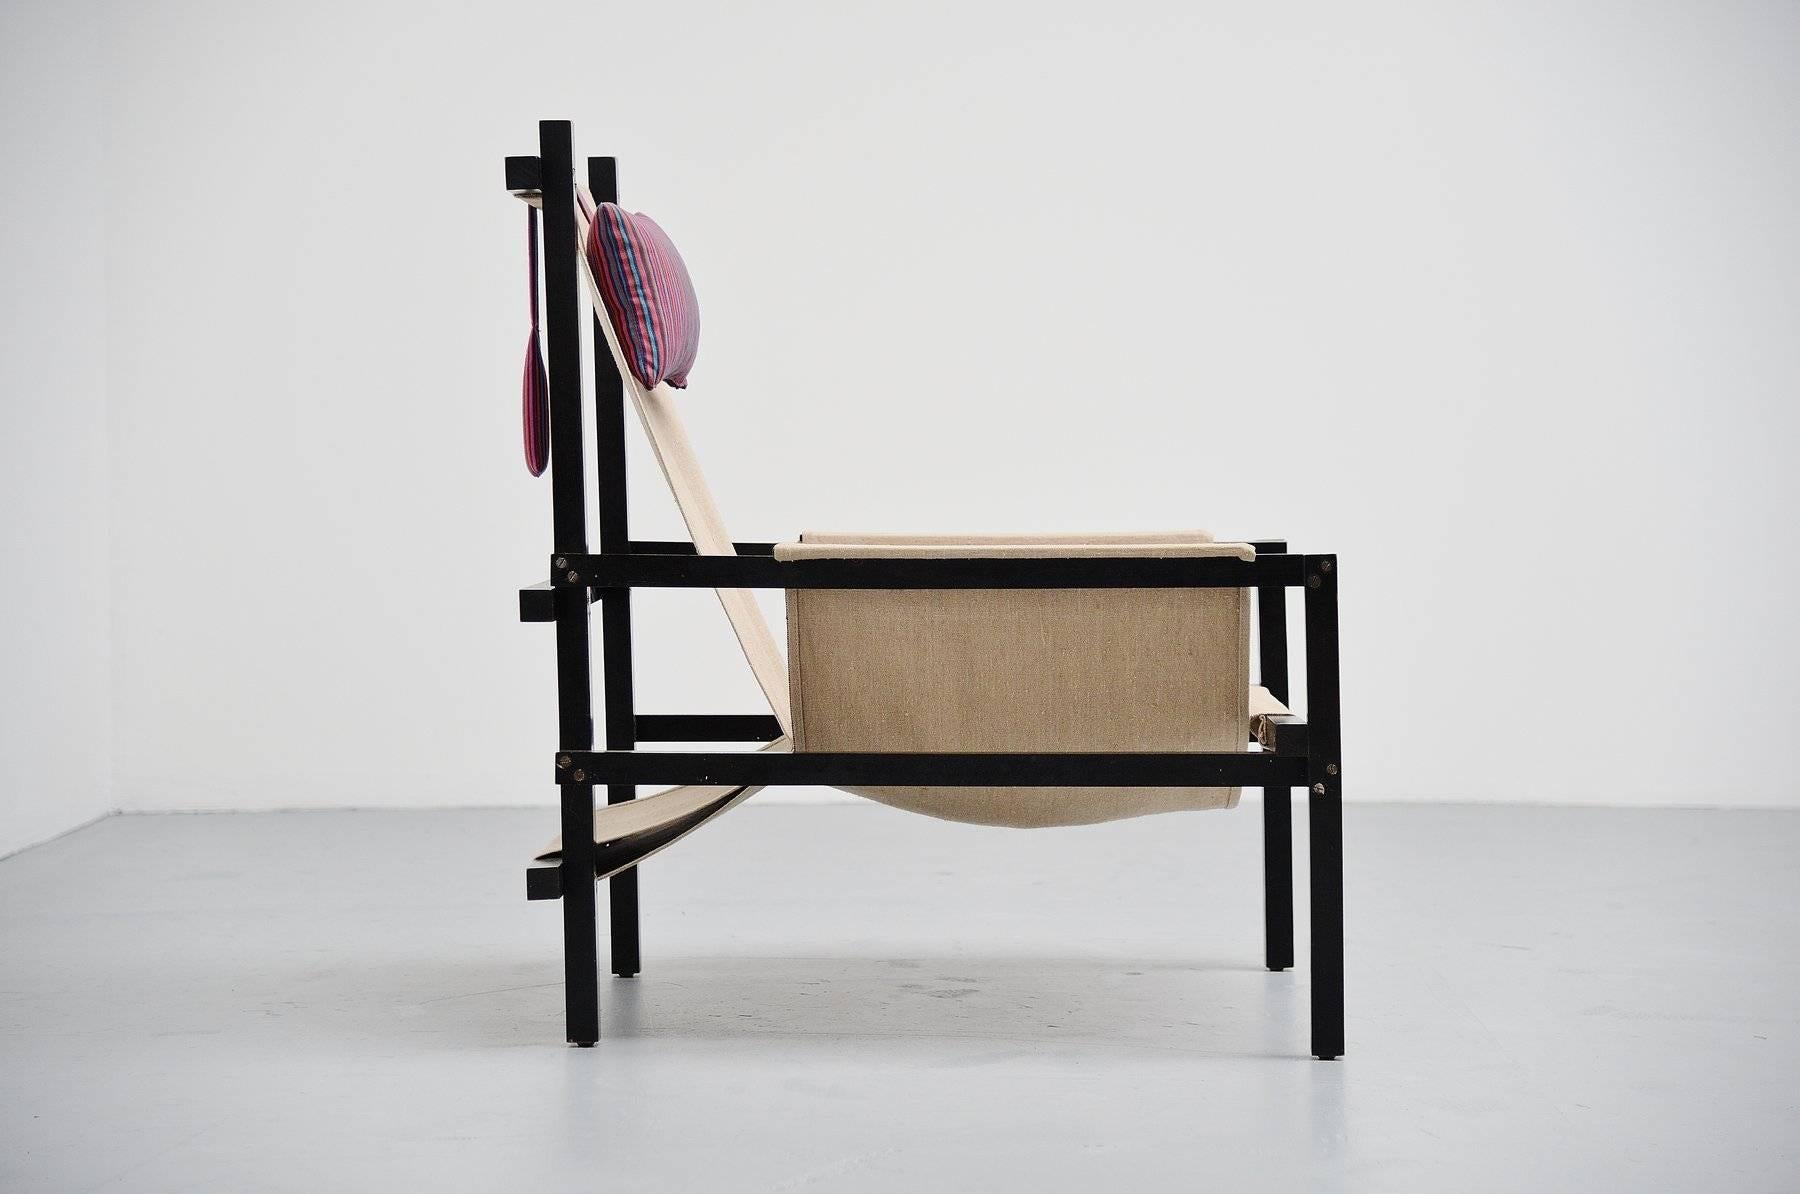 Very nice and unusual slat chair designed and made by unknown manufacturer, Holland, 1950. This chair was for sure inspired by several chairs designed by Gerrit Thomas Rietveld in de Stijl period. When I first saw this chair years ago I thought it